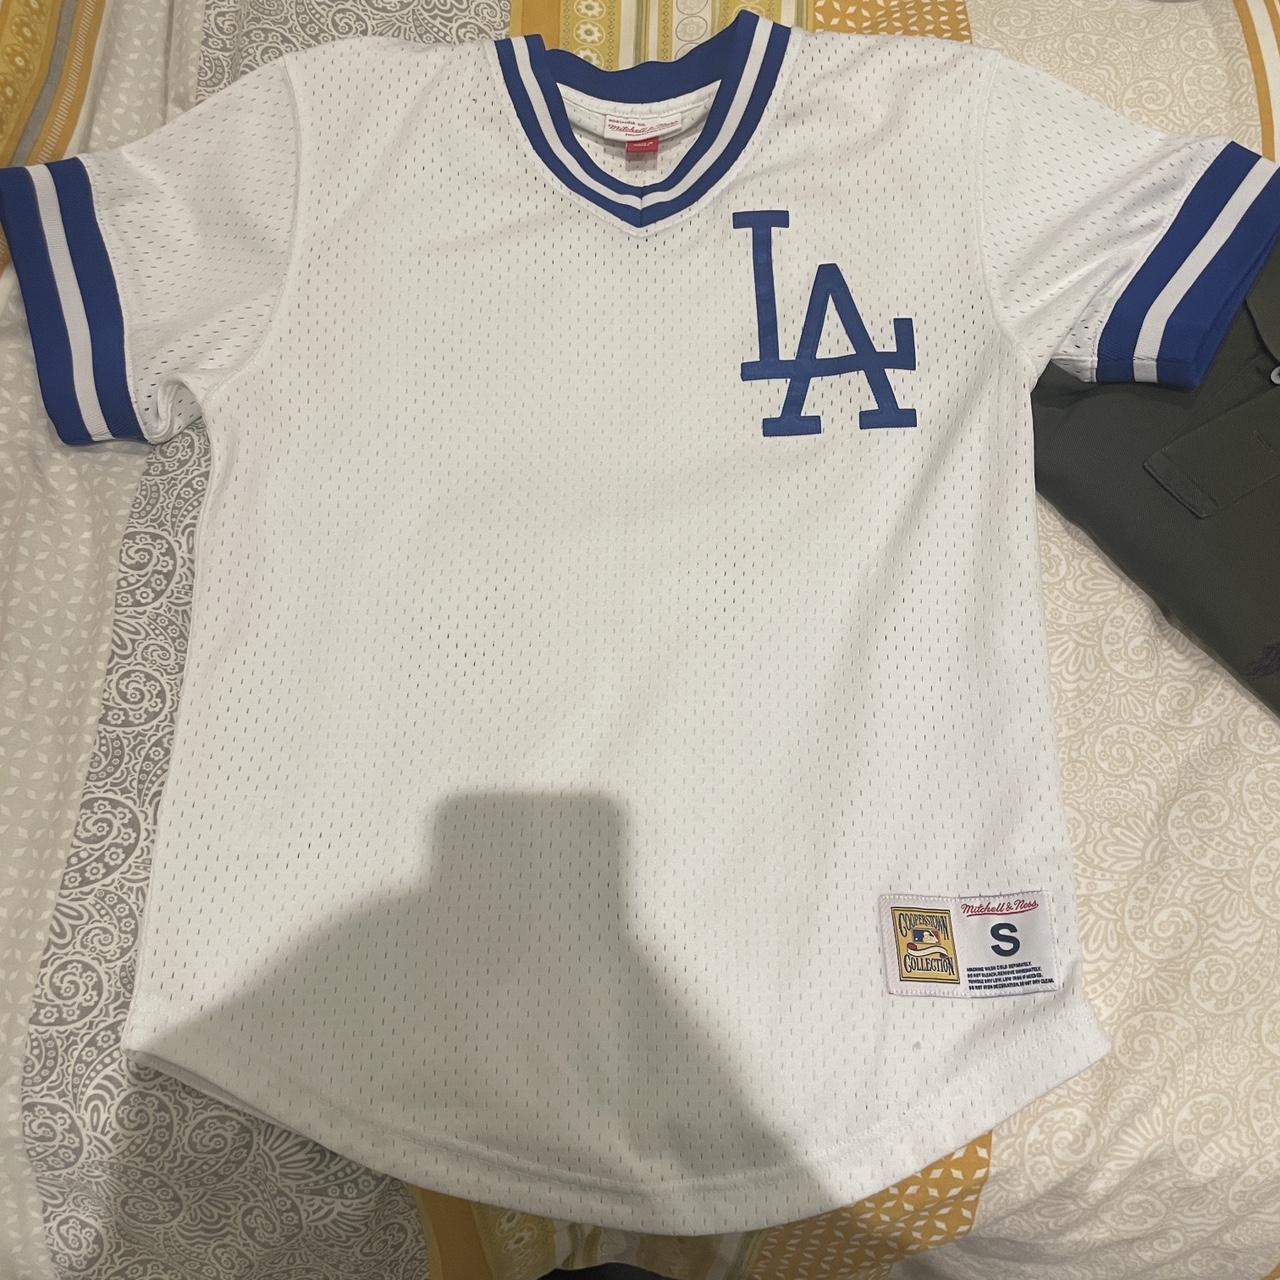 Mitchell & Ness Los Angeles Dodgers Mesh V-neck Jersey in White for Men